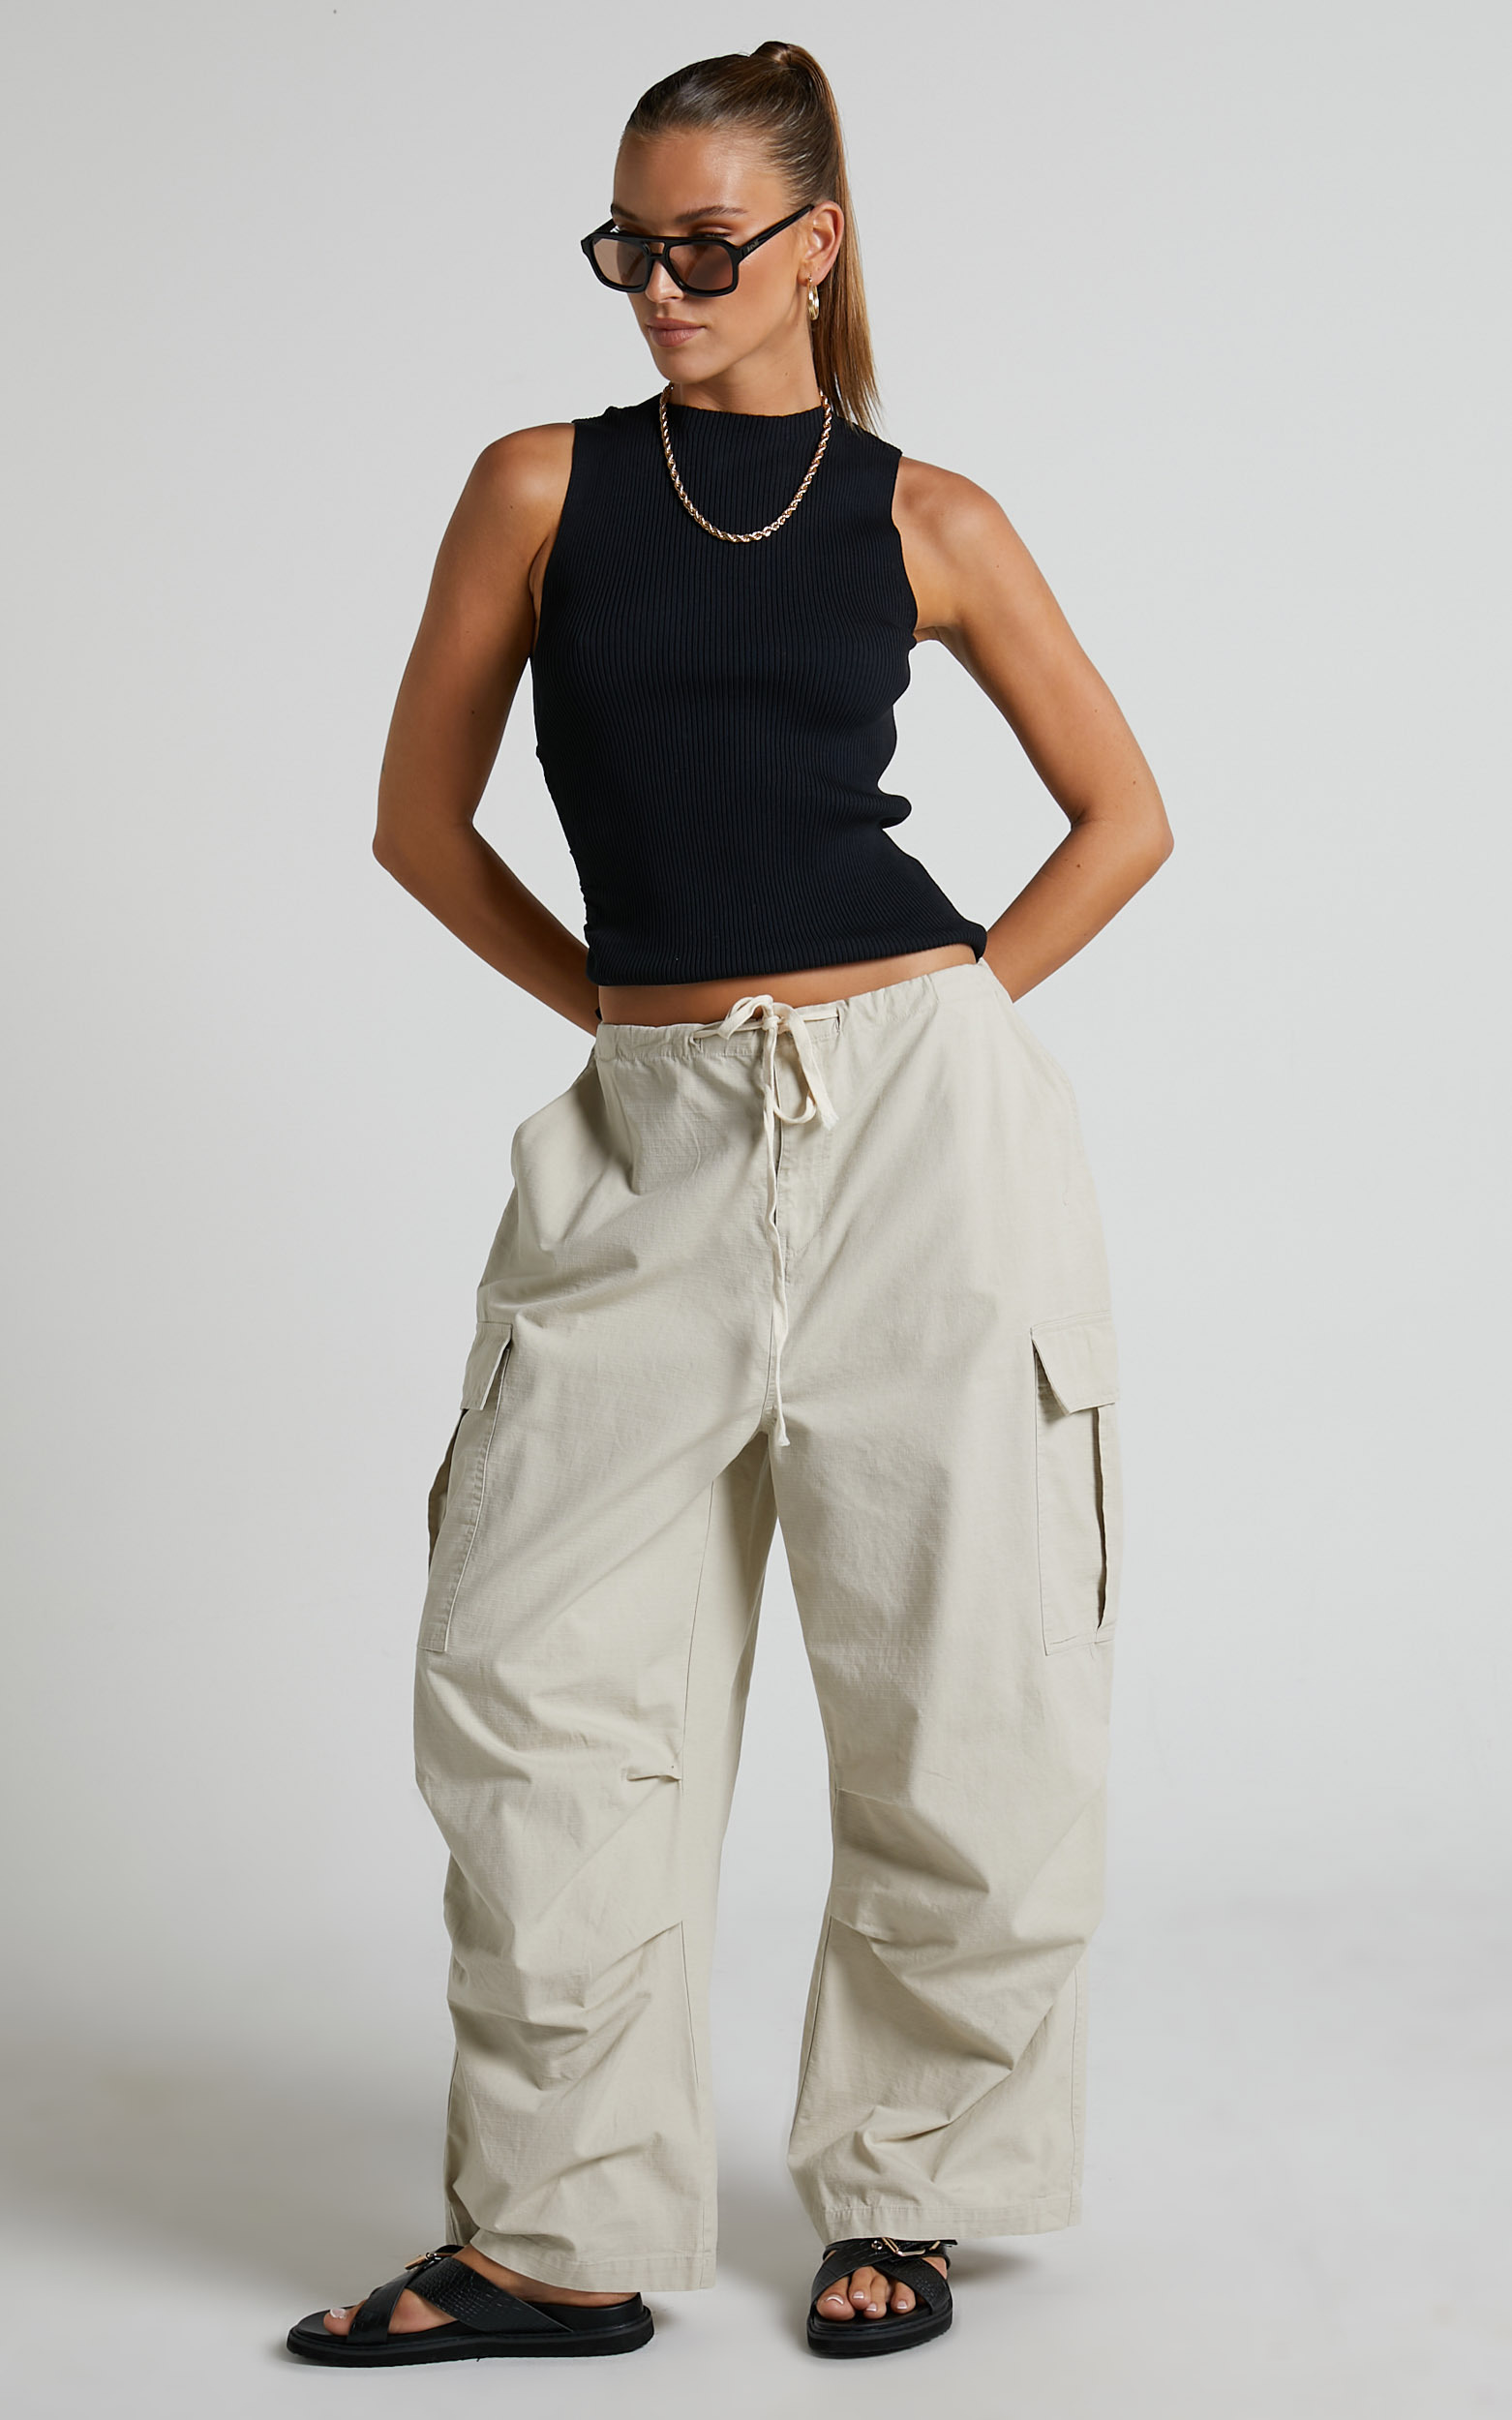 Utility Pant in Stone - L, NEU1, hi-res image number null